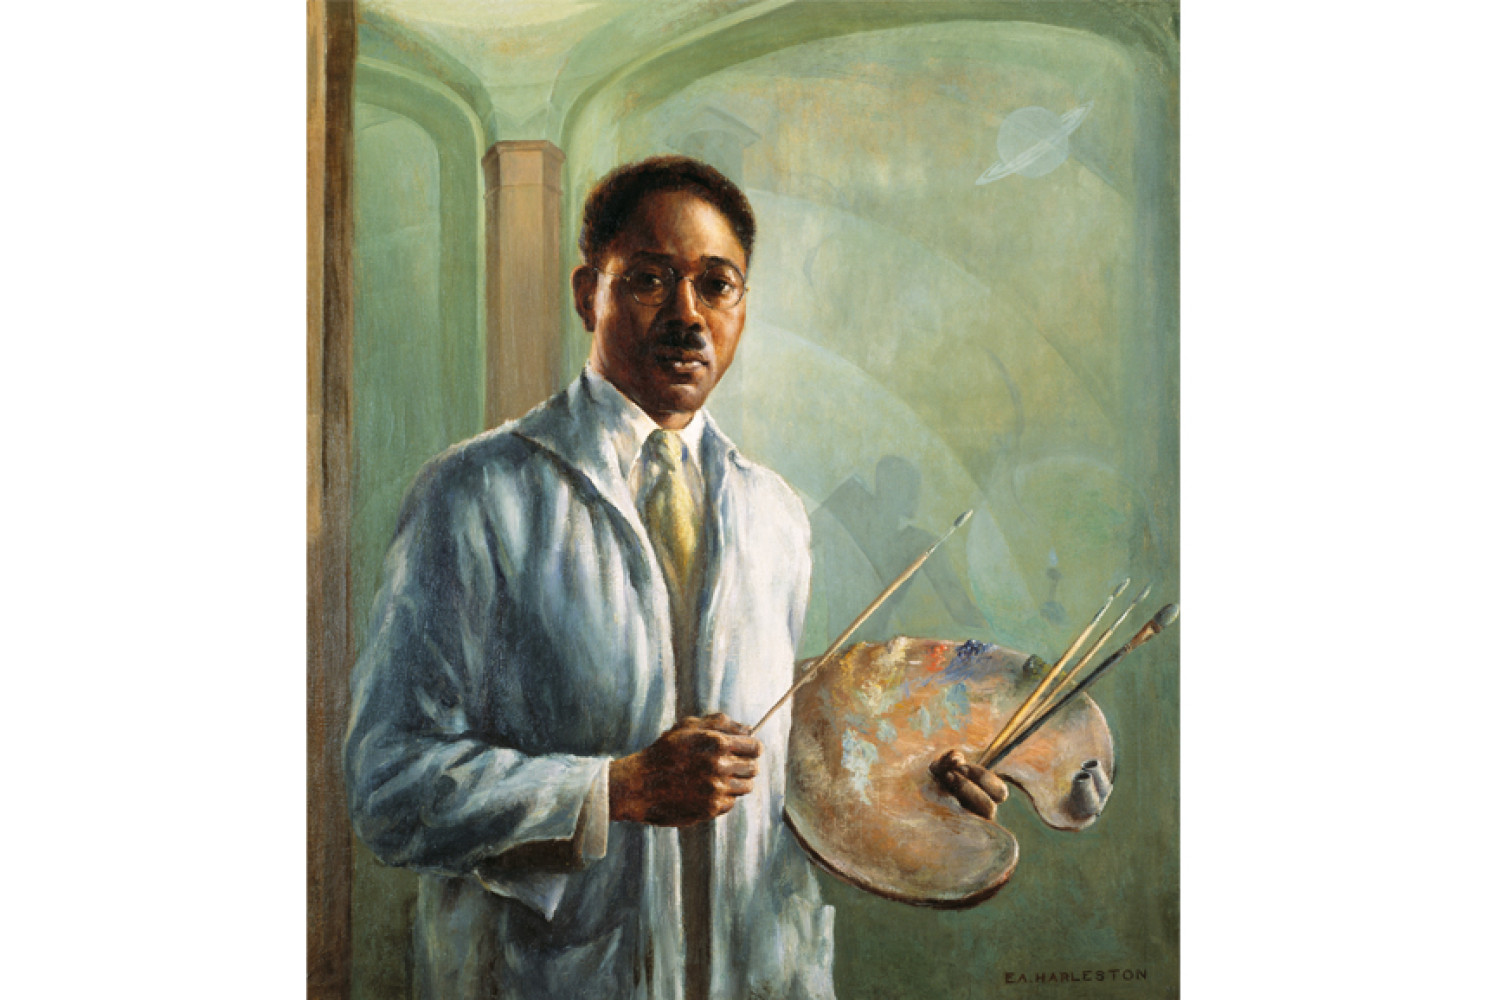 Portrait of Aaron Douglas, 1930, by Edwin Harleston (American, 1882-1931). Oil on cavnas. 32 1/4 x 28 1/4 inches. Museum purchase. 1988.003